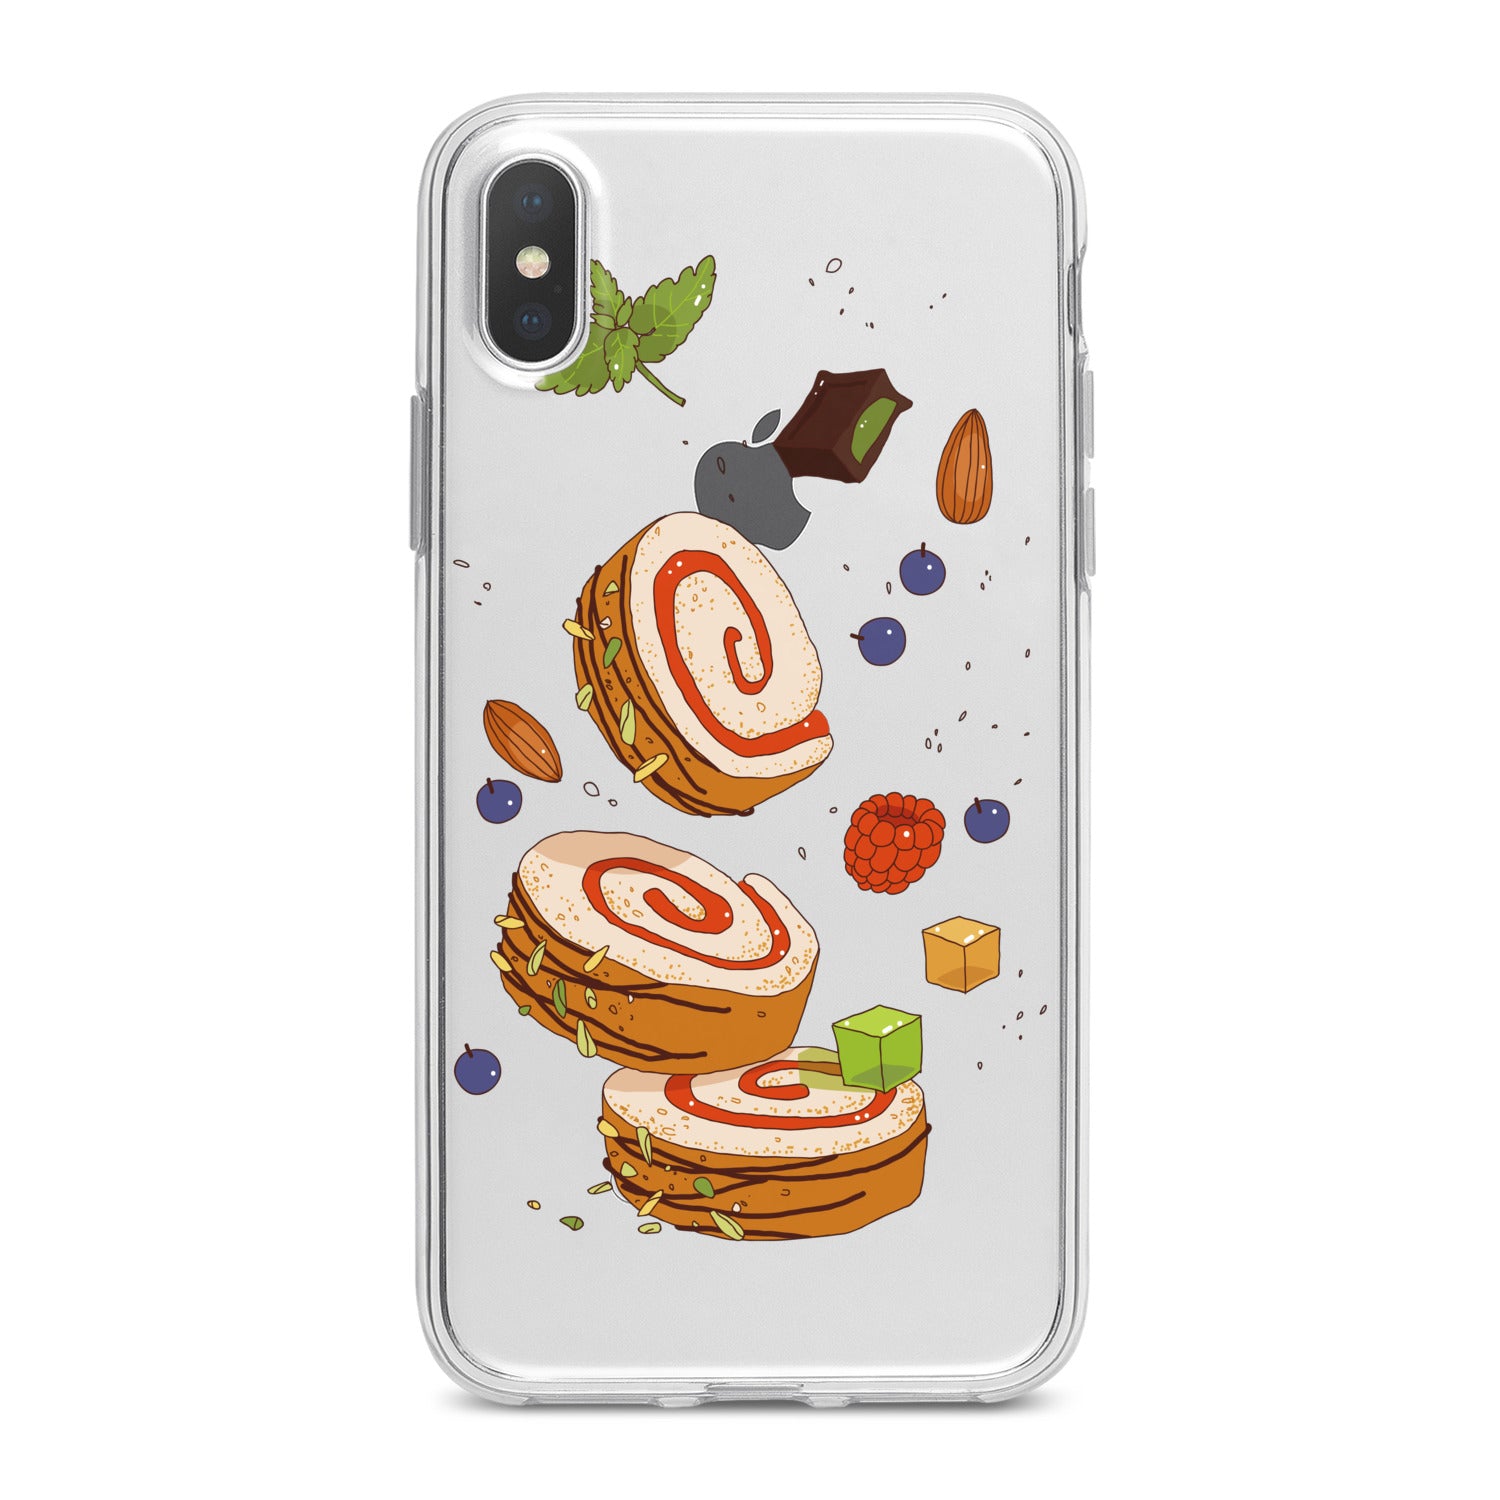 Lex Altern Healthy Sweets Phone Case for your iPhone & Android phone.